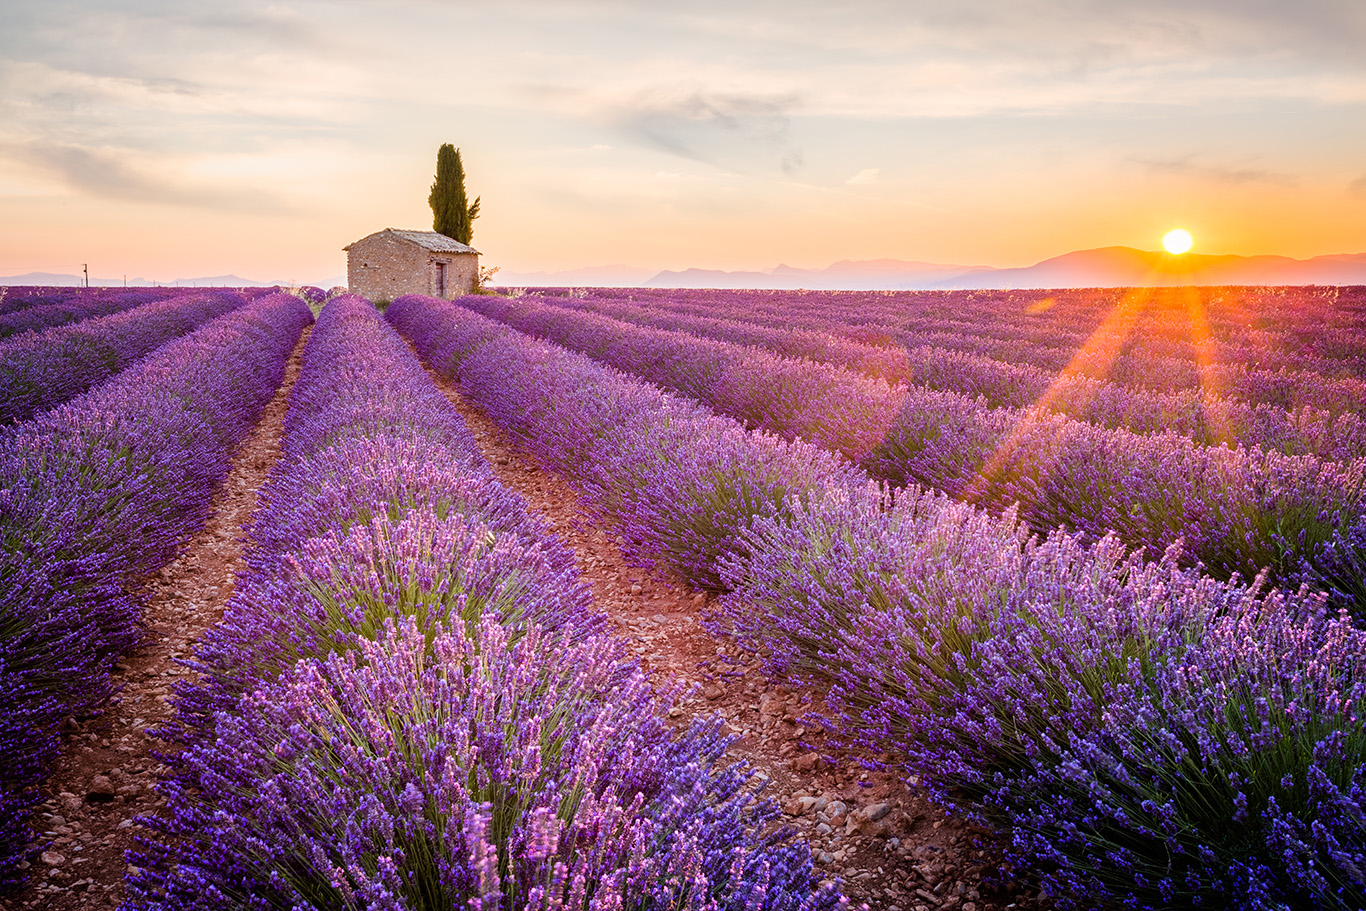 Add on a 2 night stay in the Luberon among the magical lavender fields